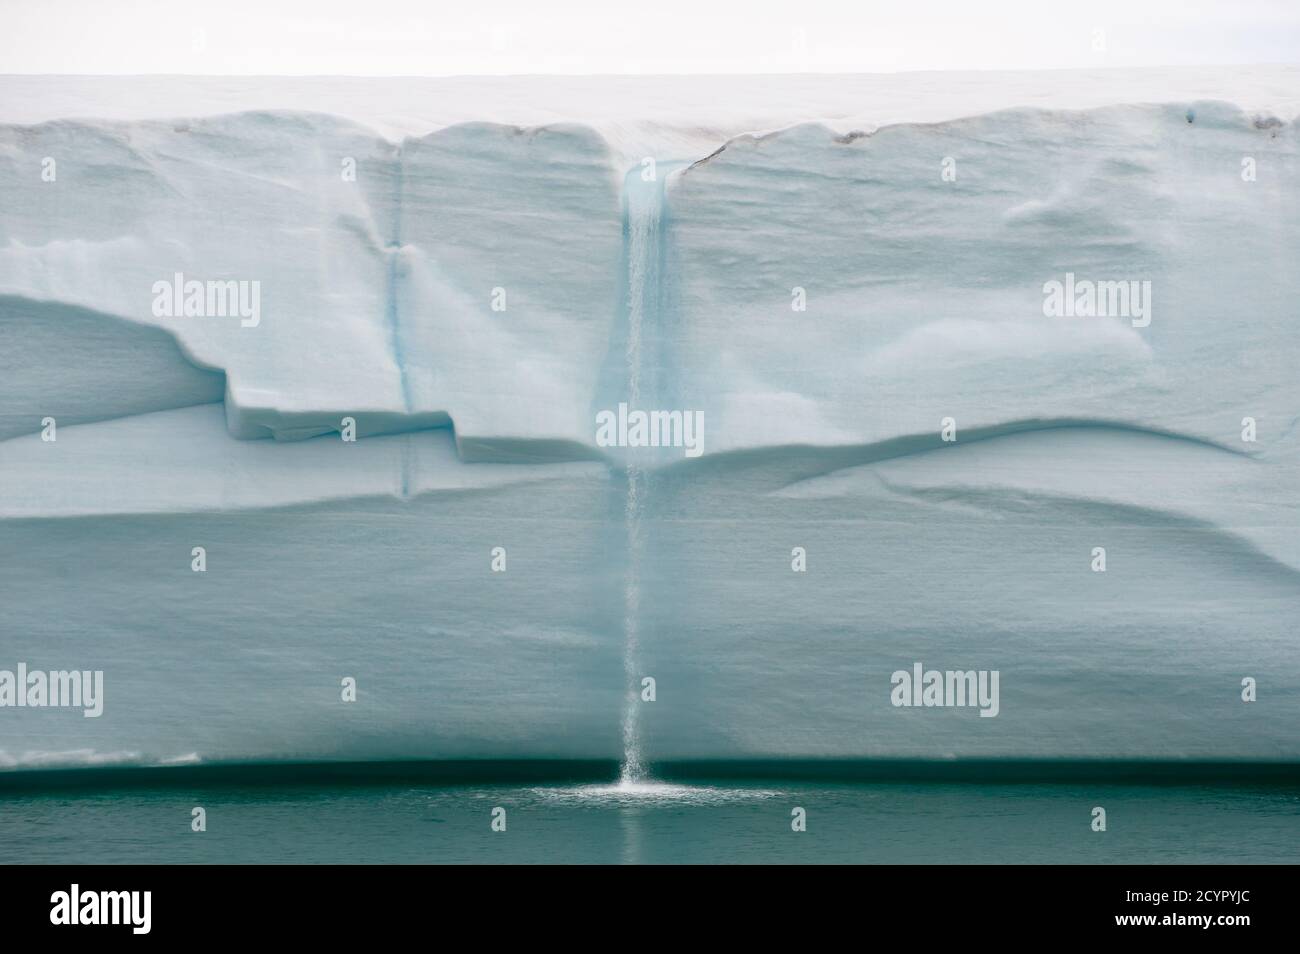 Melting ice water falls from a Northern Arctic glacial wall as a waterfall into a turquoise ocean.Climate Change.Climate Emergency Stock Photo